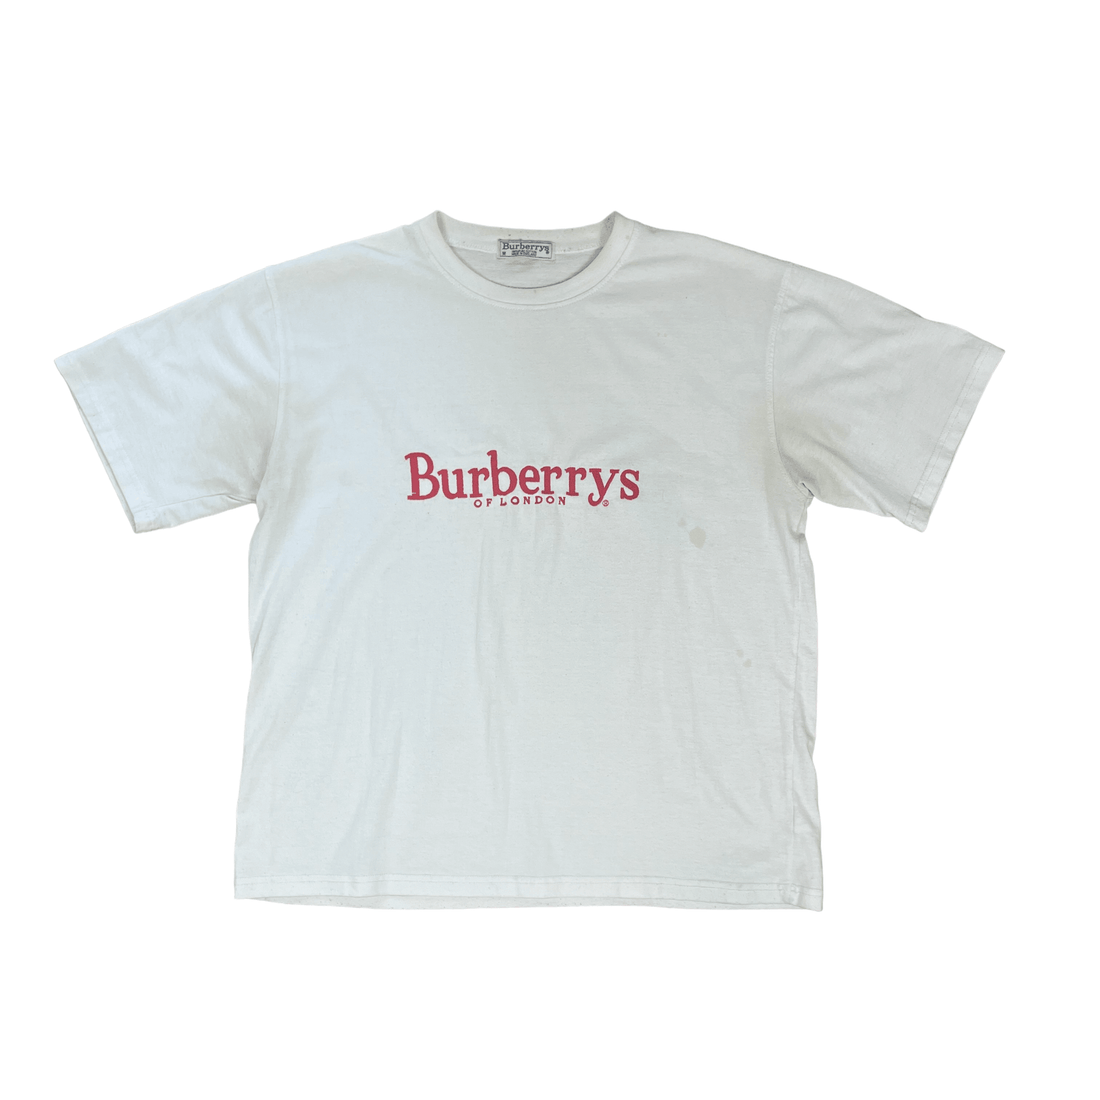 Vintage 90s White Burberry Spell-Out Tee - Medium - The Streetwear Studio